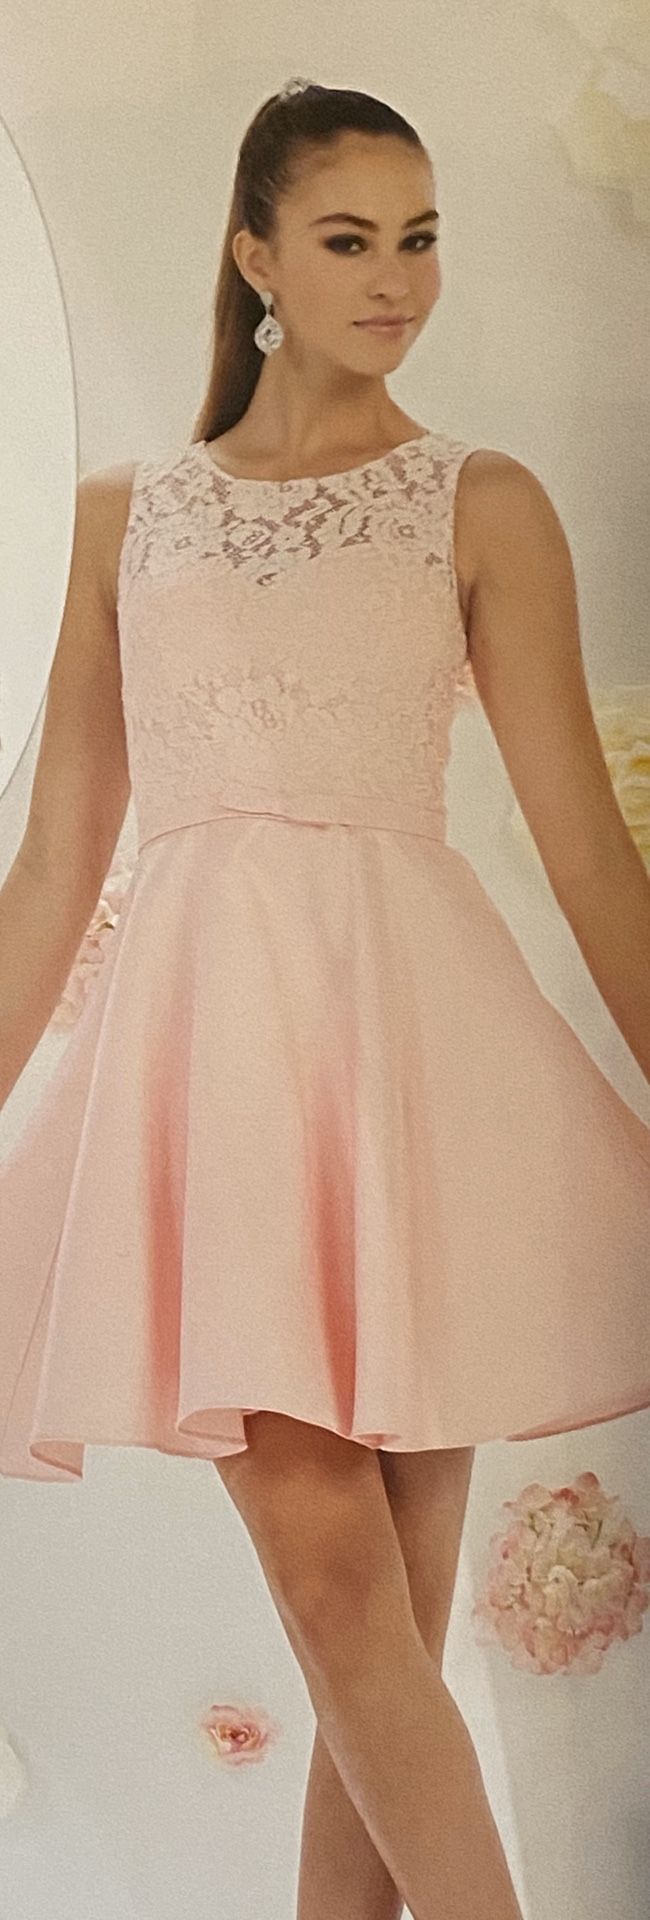 May queen 2020 prom/ball dress